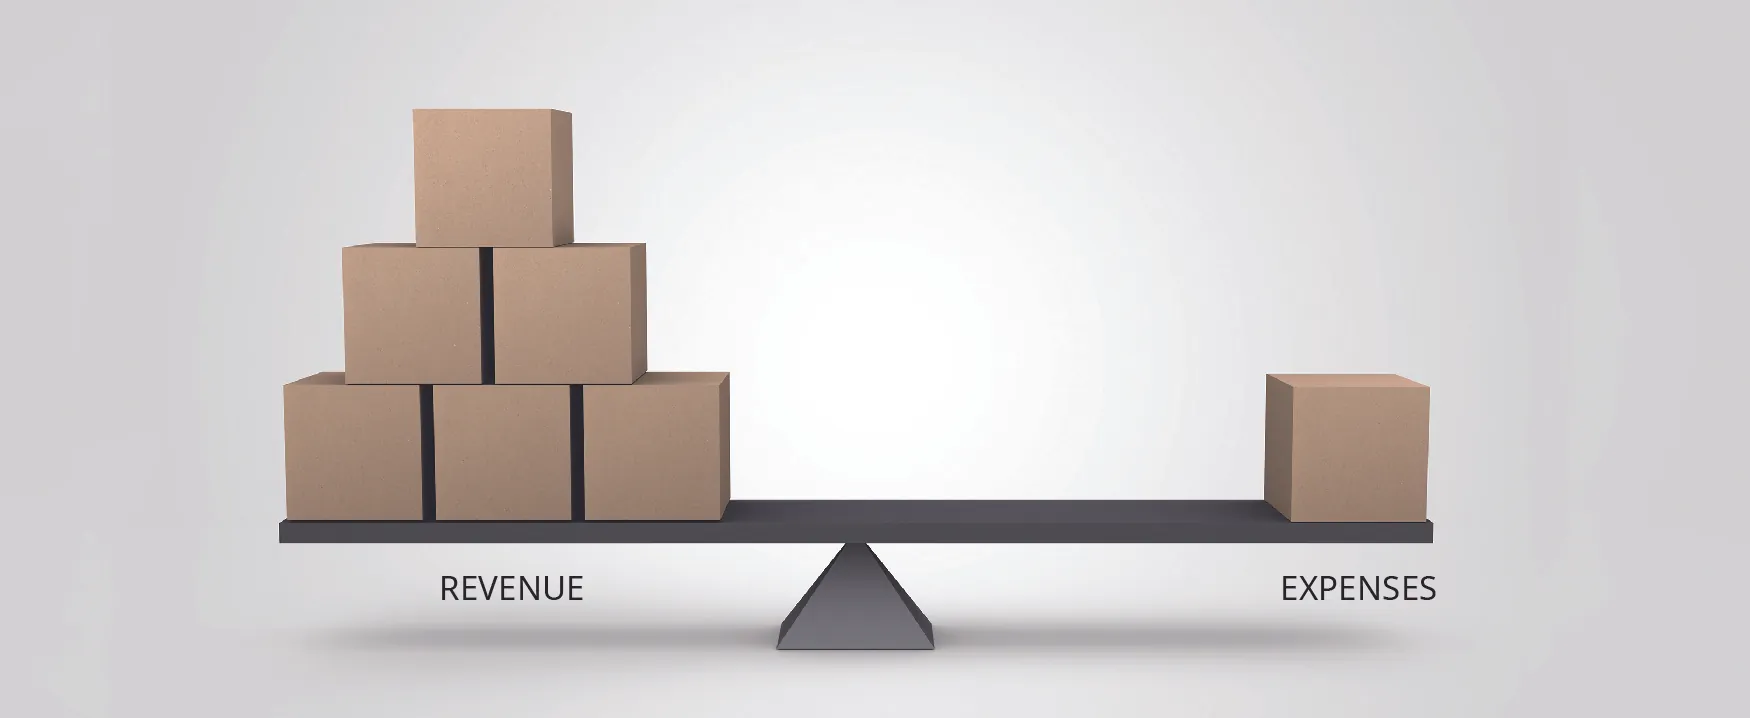 Picture of a scale with Revenue (represented by six boxes) on one side and Expenses (represented by one box) on the other.